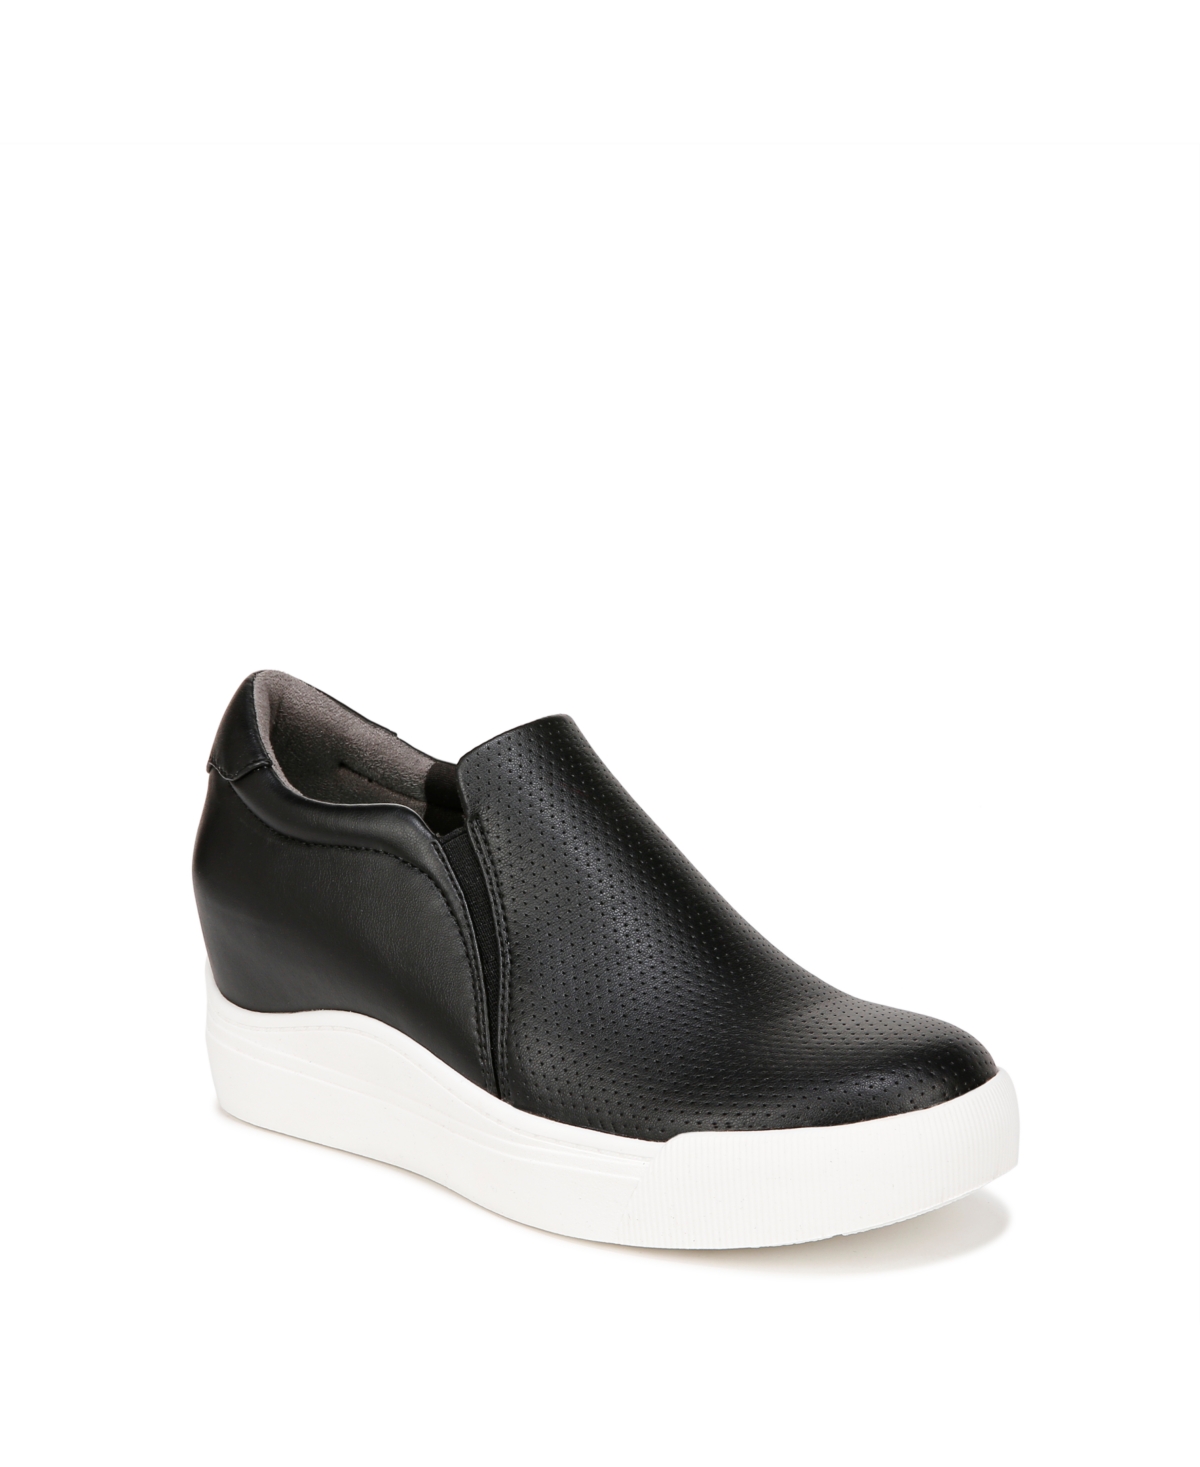 Women's Time Off Wedge Slip-On Sneakers - Black Faux Leather